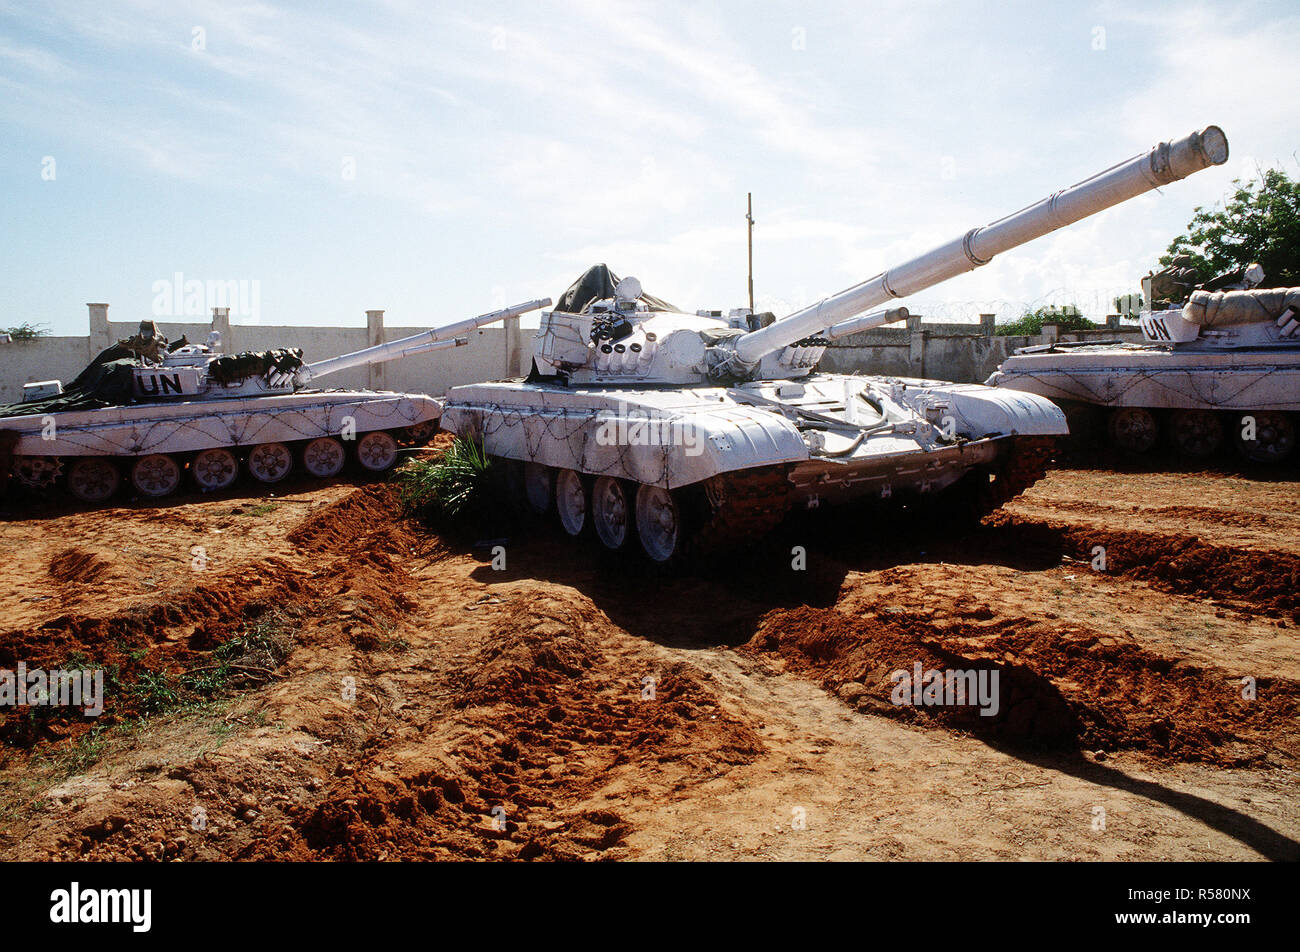 United Nations tanks at the Belgian compound in Kismayo.  3/4 right side view of a T-72 main battle tank with UN markings.  The UN forces are in Somalia in support of OPERATION CONTINUE HOPE. Stock Photo